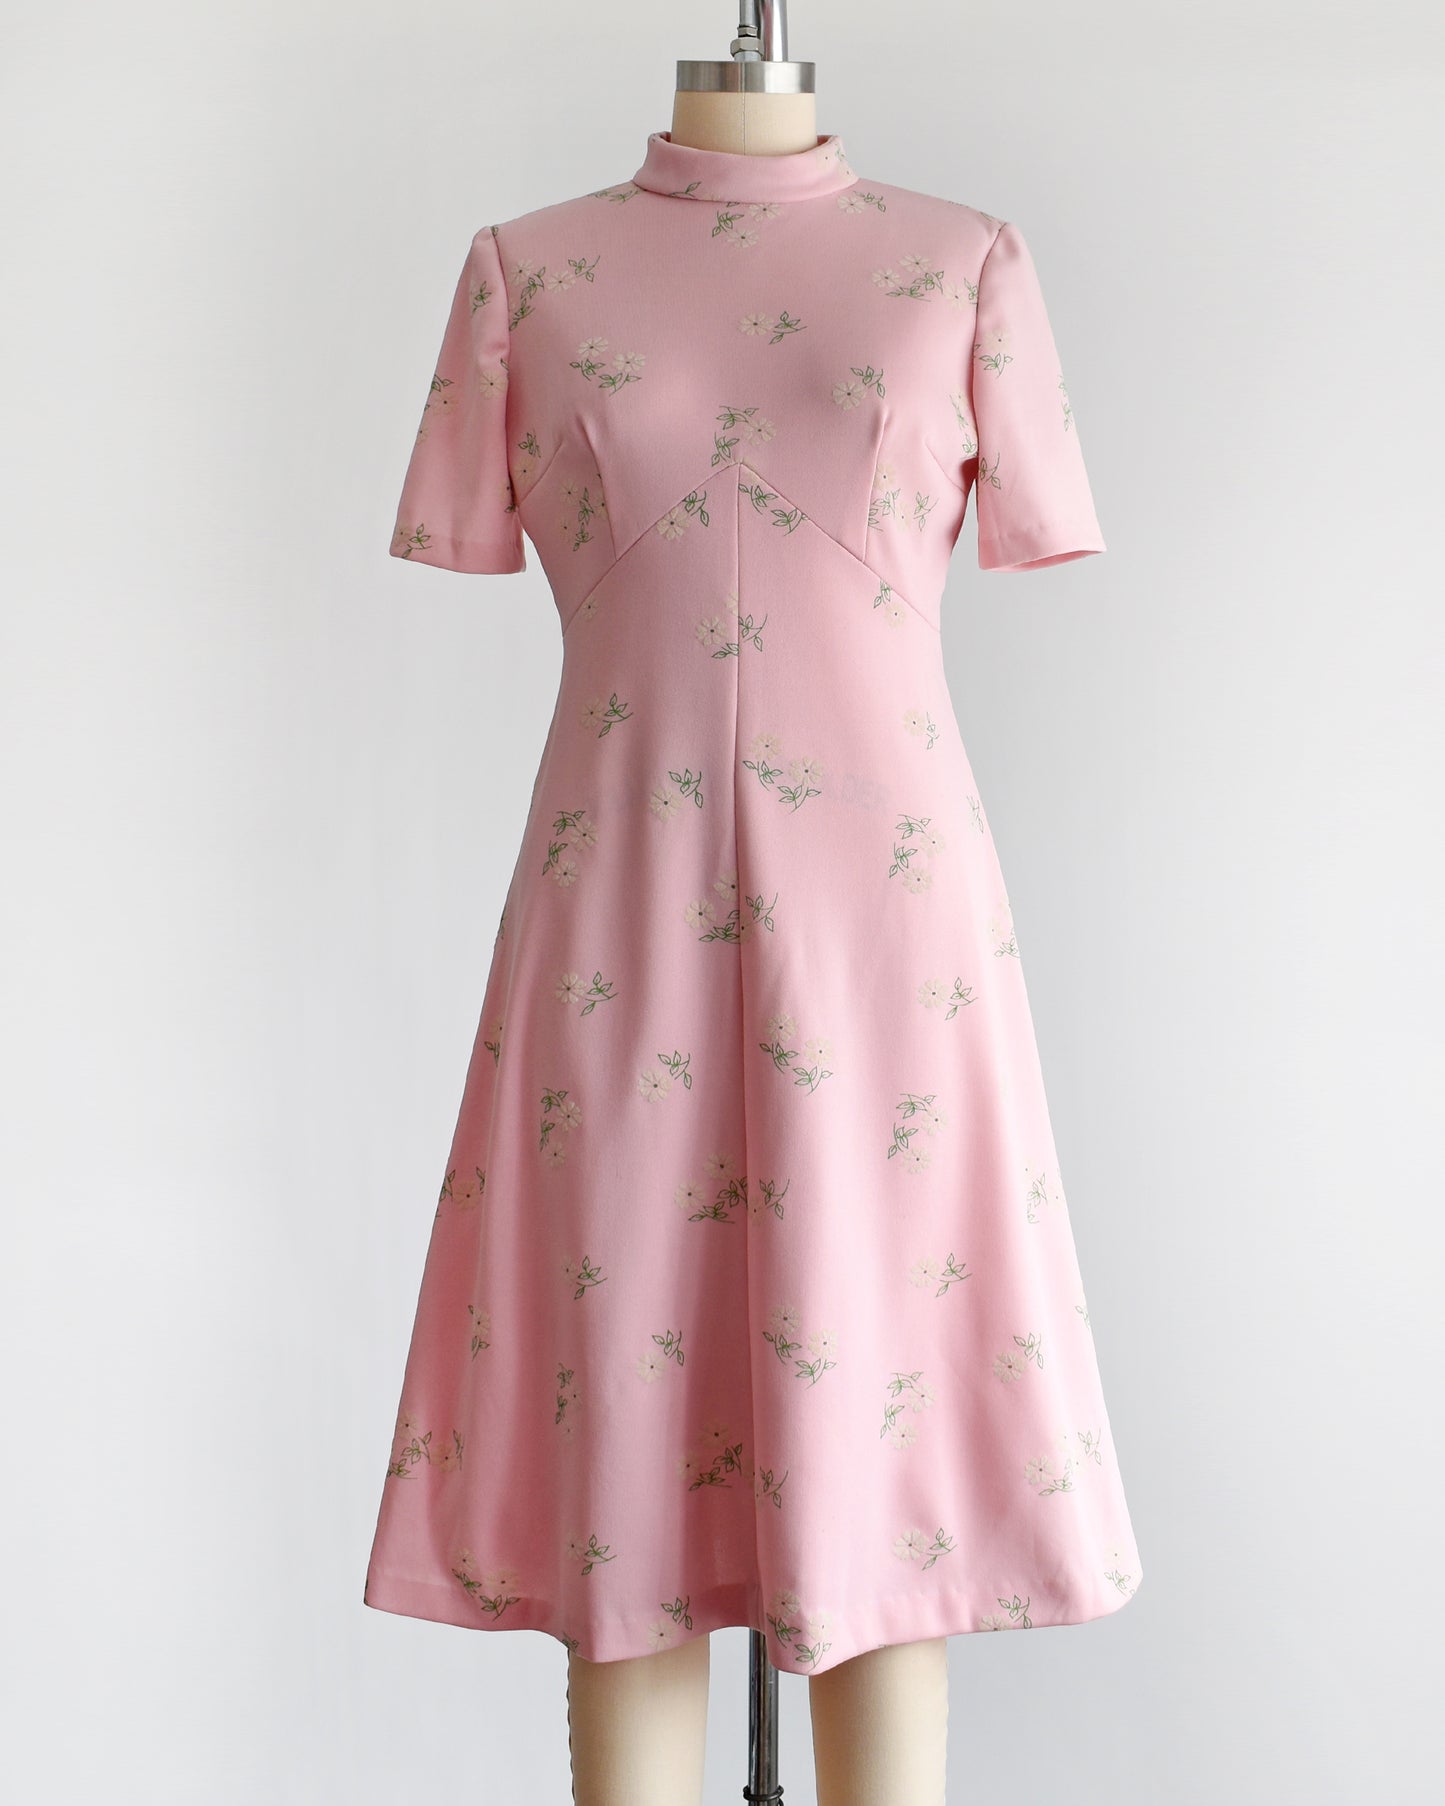 a vintage 1960s pink and white floral mod dress.